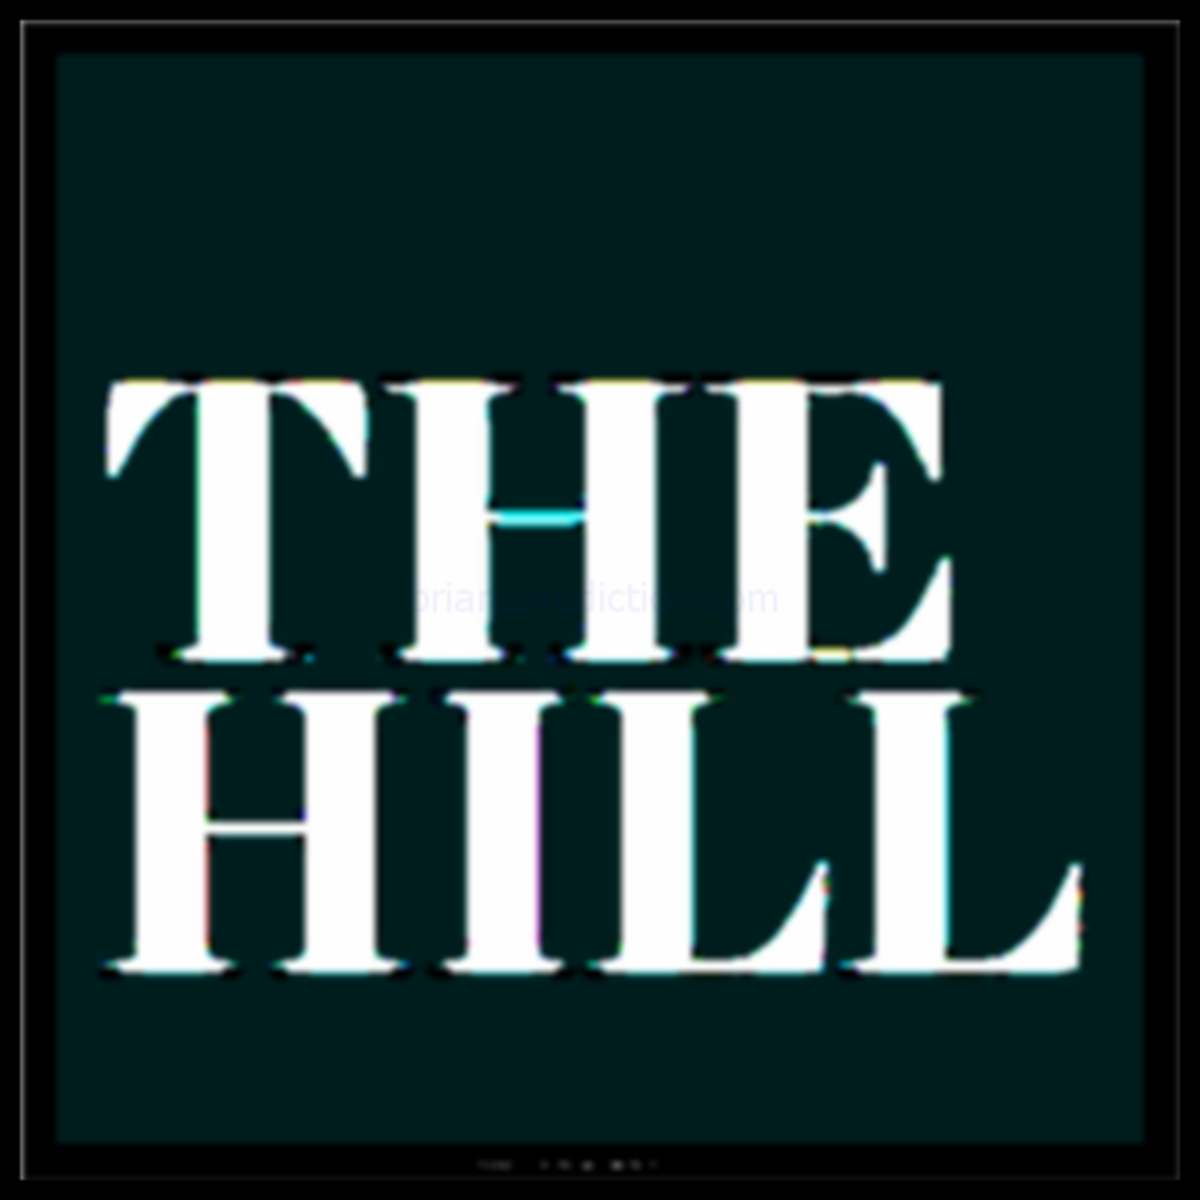 thehill-logo-big Matthew George Whitaker and World Patent Marketing Inc secrets you have got to see before they are pulled from the web thehill-logo-big    psychic Brian Ladd
thehill-logo-big Matthew George Whitaker and World Patent Marketing Inc secrets you have got to see before they are pulled from the web thehill-logo-big    psychic Brian Ladd
